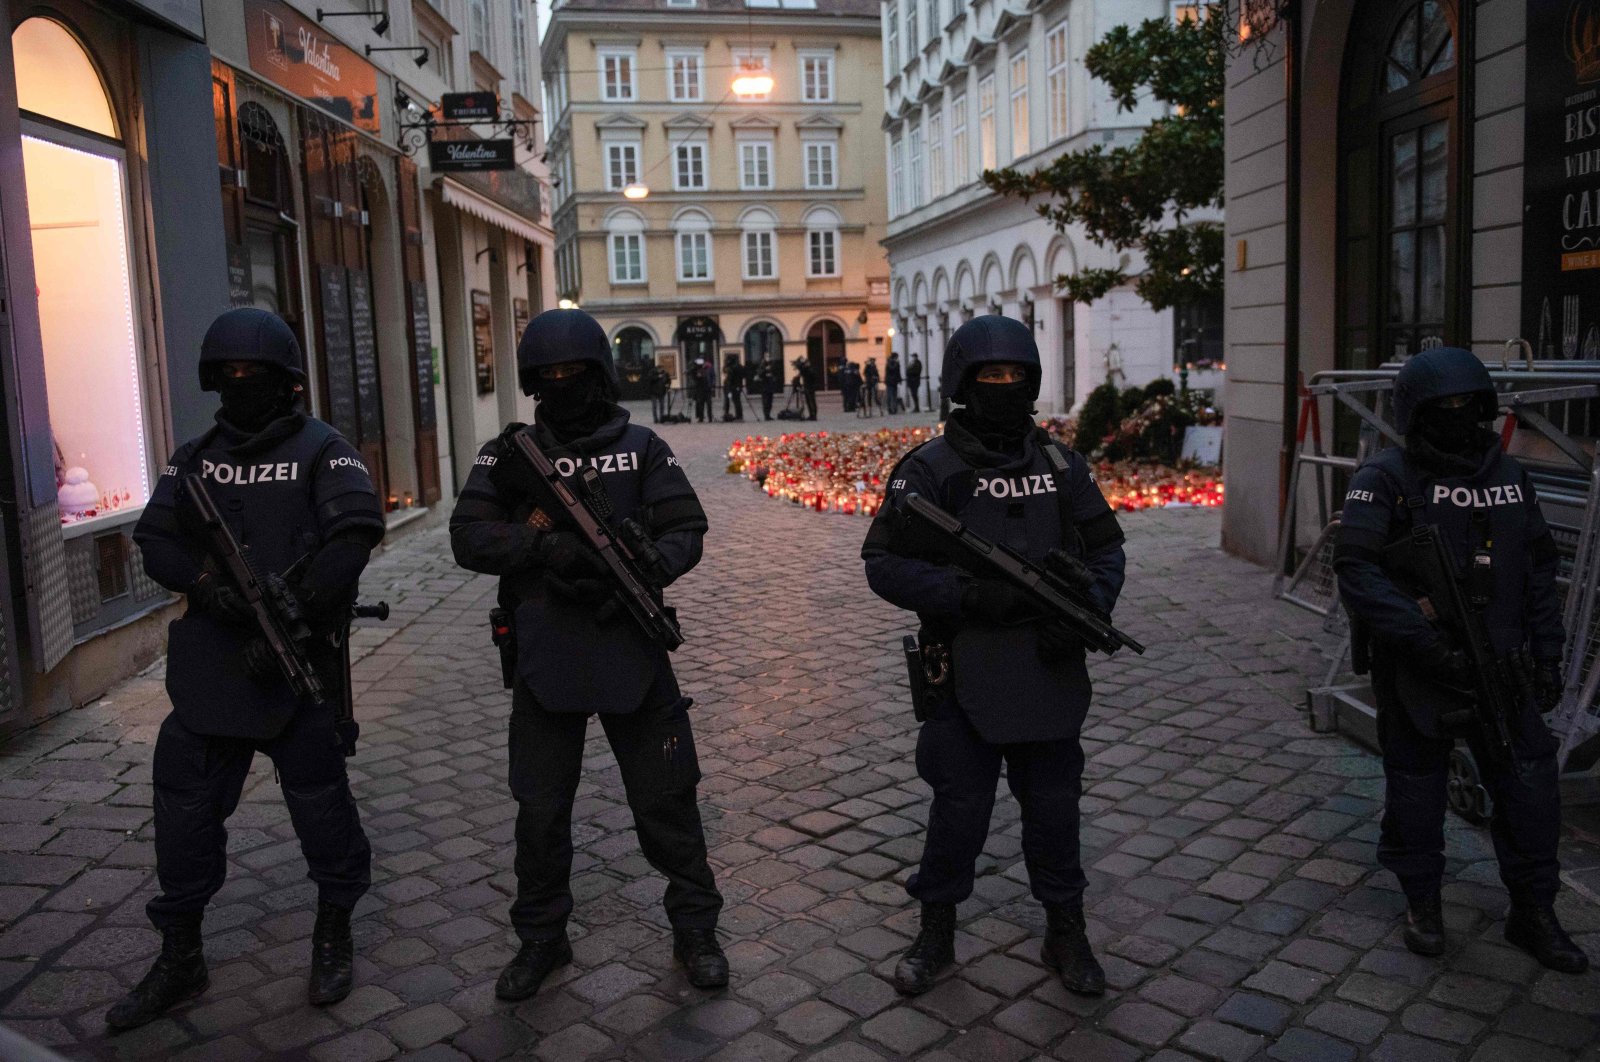 Armed police officers stand guard before the arrival of Austrian Chancellor Kurz and European Council President Charles Michel for a visit to pay respects to the victims of the terrorist attack in Vienna, Austria, Nov. 9, 2020. (AFP Photo)